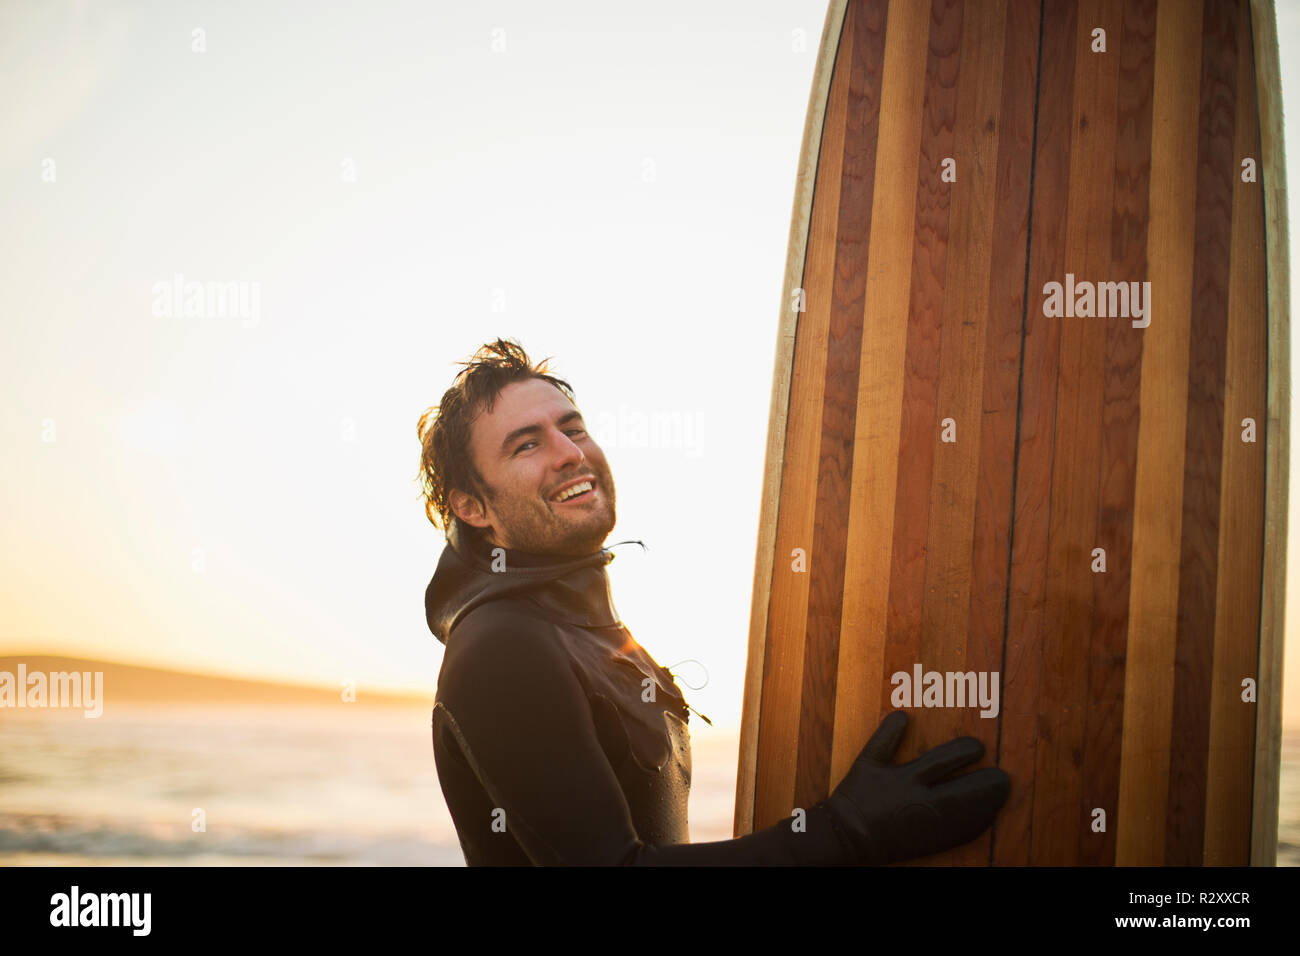 Smiling mid adult man carrying a surfboard on a beach. Stock Photo